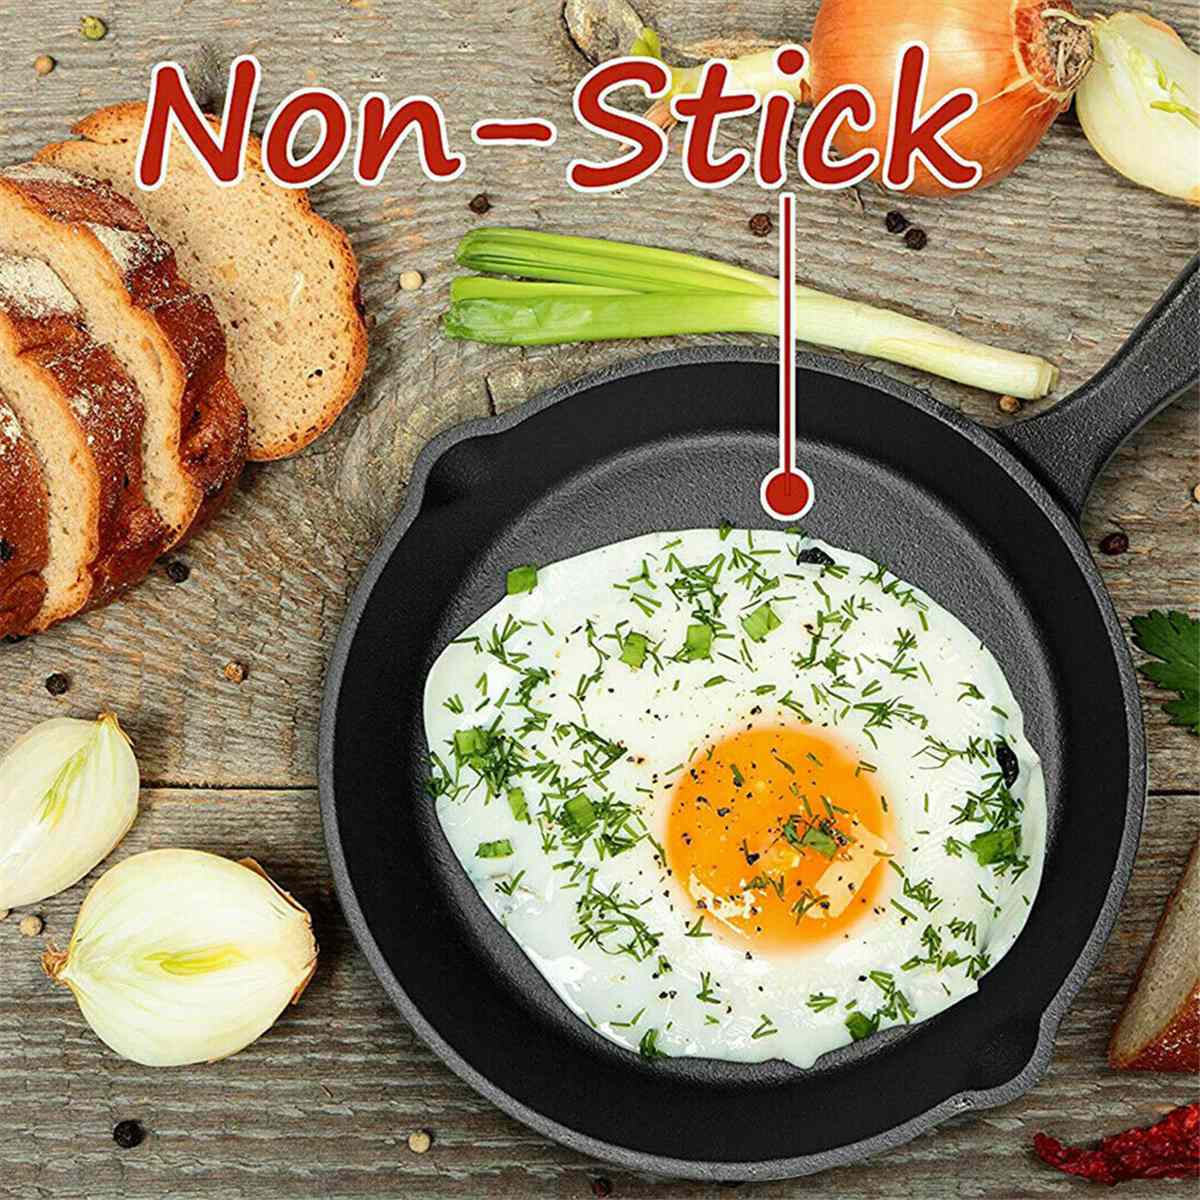 Country Kitchen 9.5” Frying Pan Black Eco Friendly Nonstick